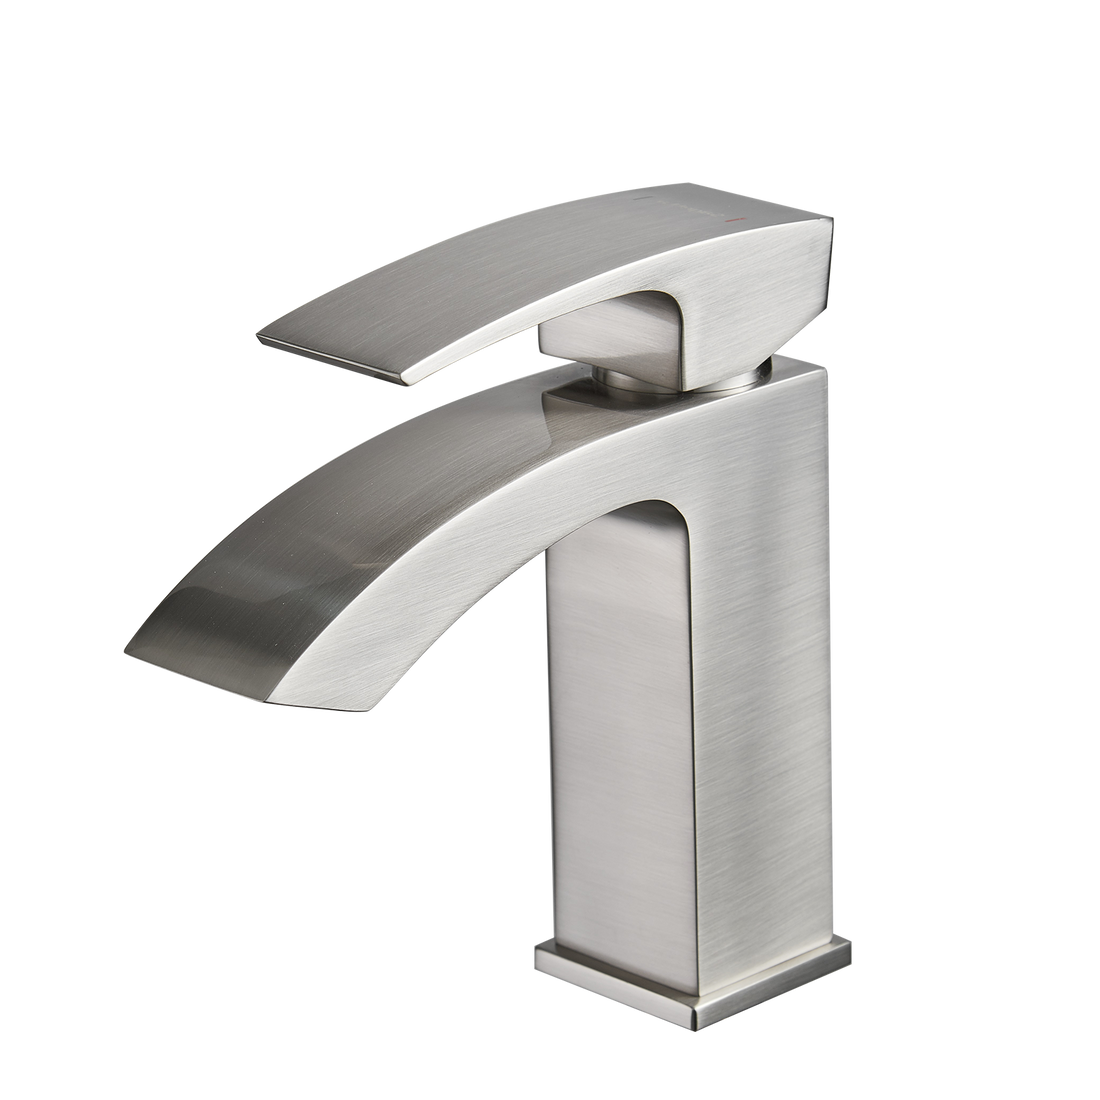 Brushed Nickel Bathroom Faucet,Faucet For